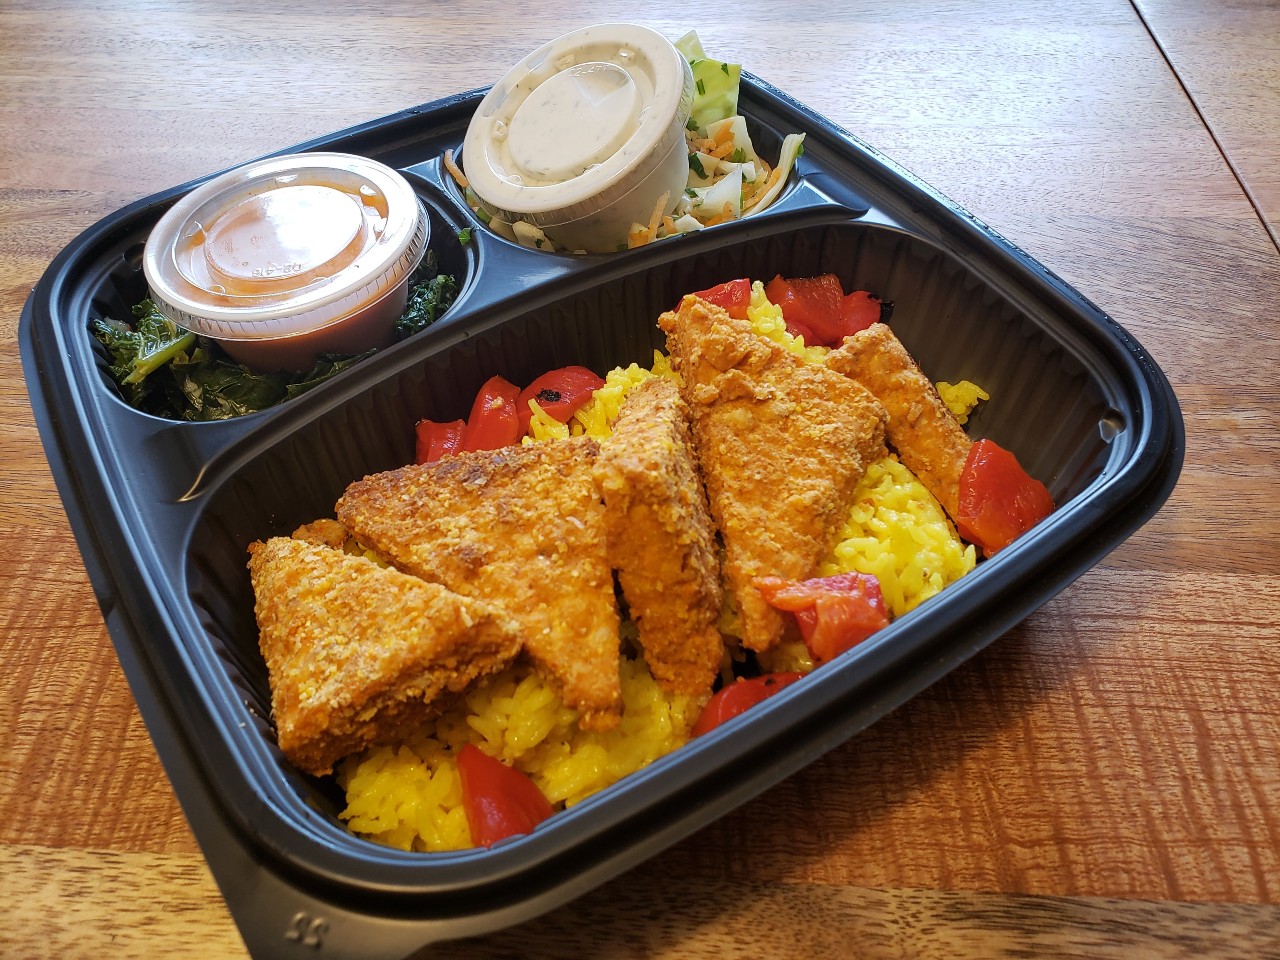 A Red Herring meal includes crusted tofu and two small carryout cups of sauce. Photo by Sara Ressing.